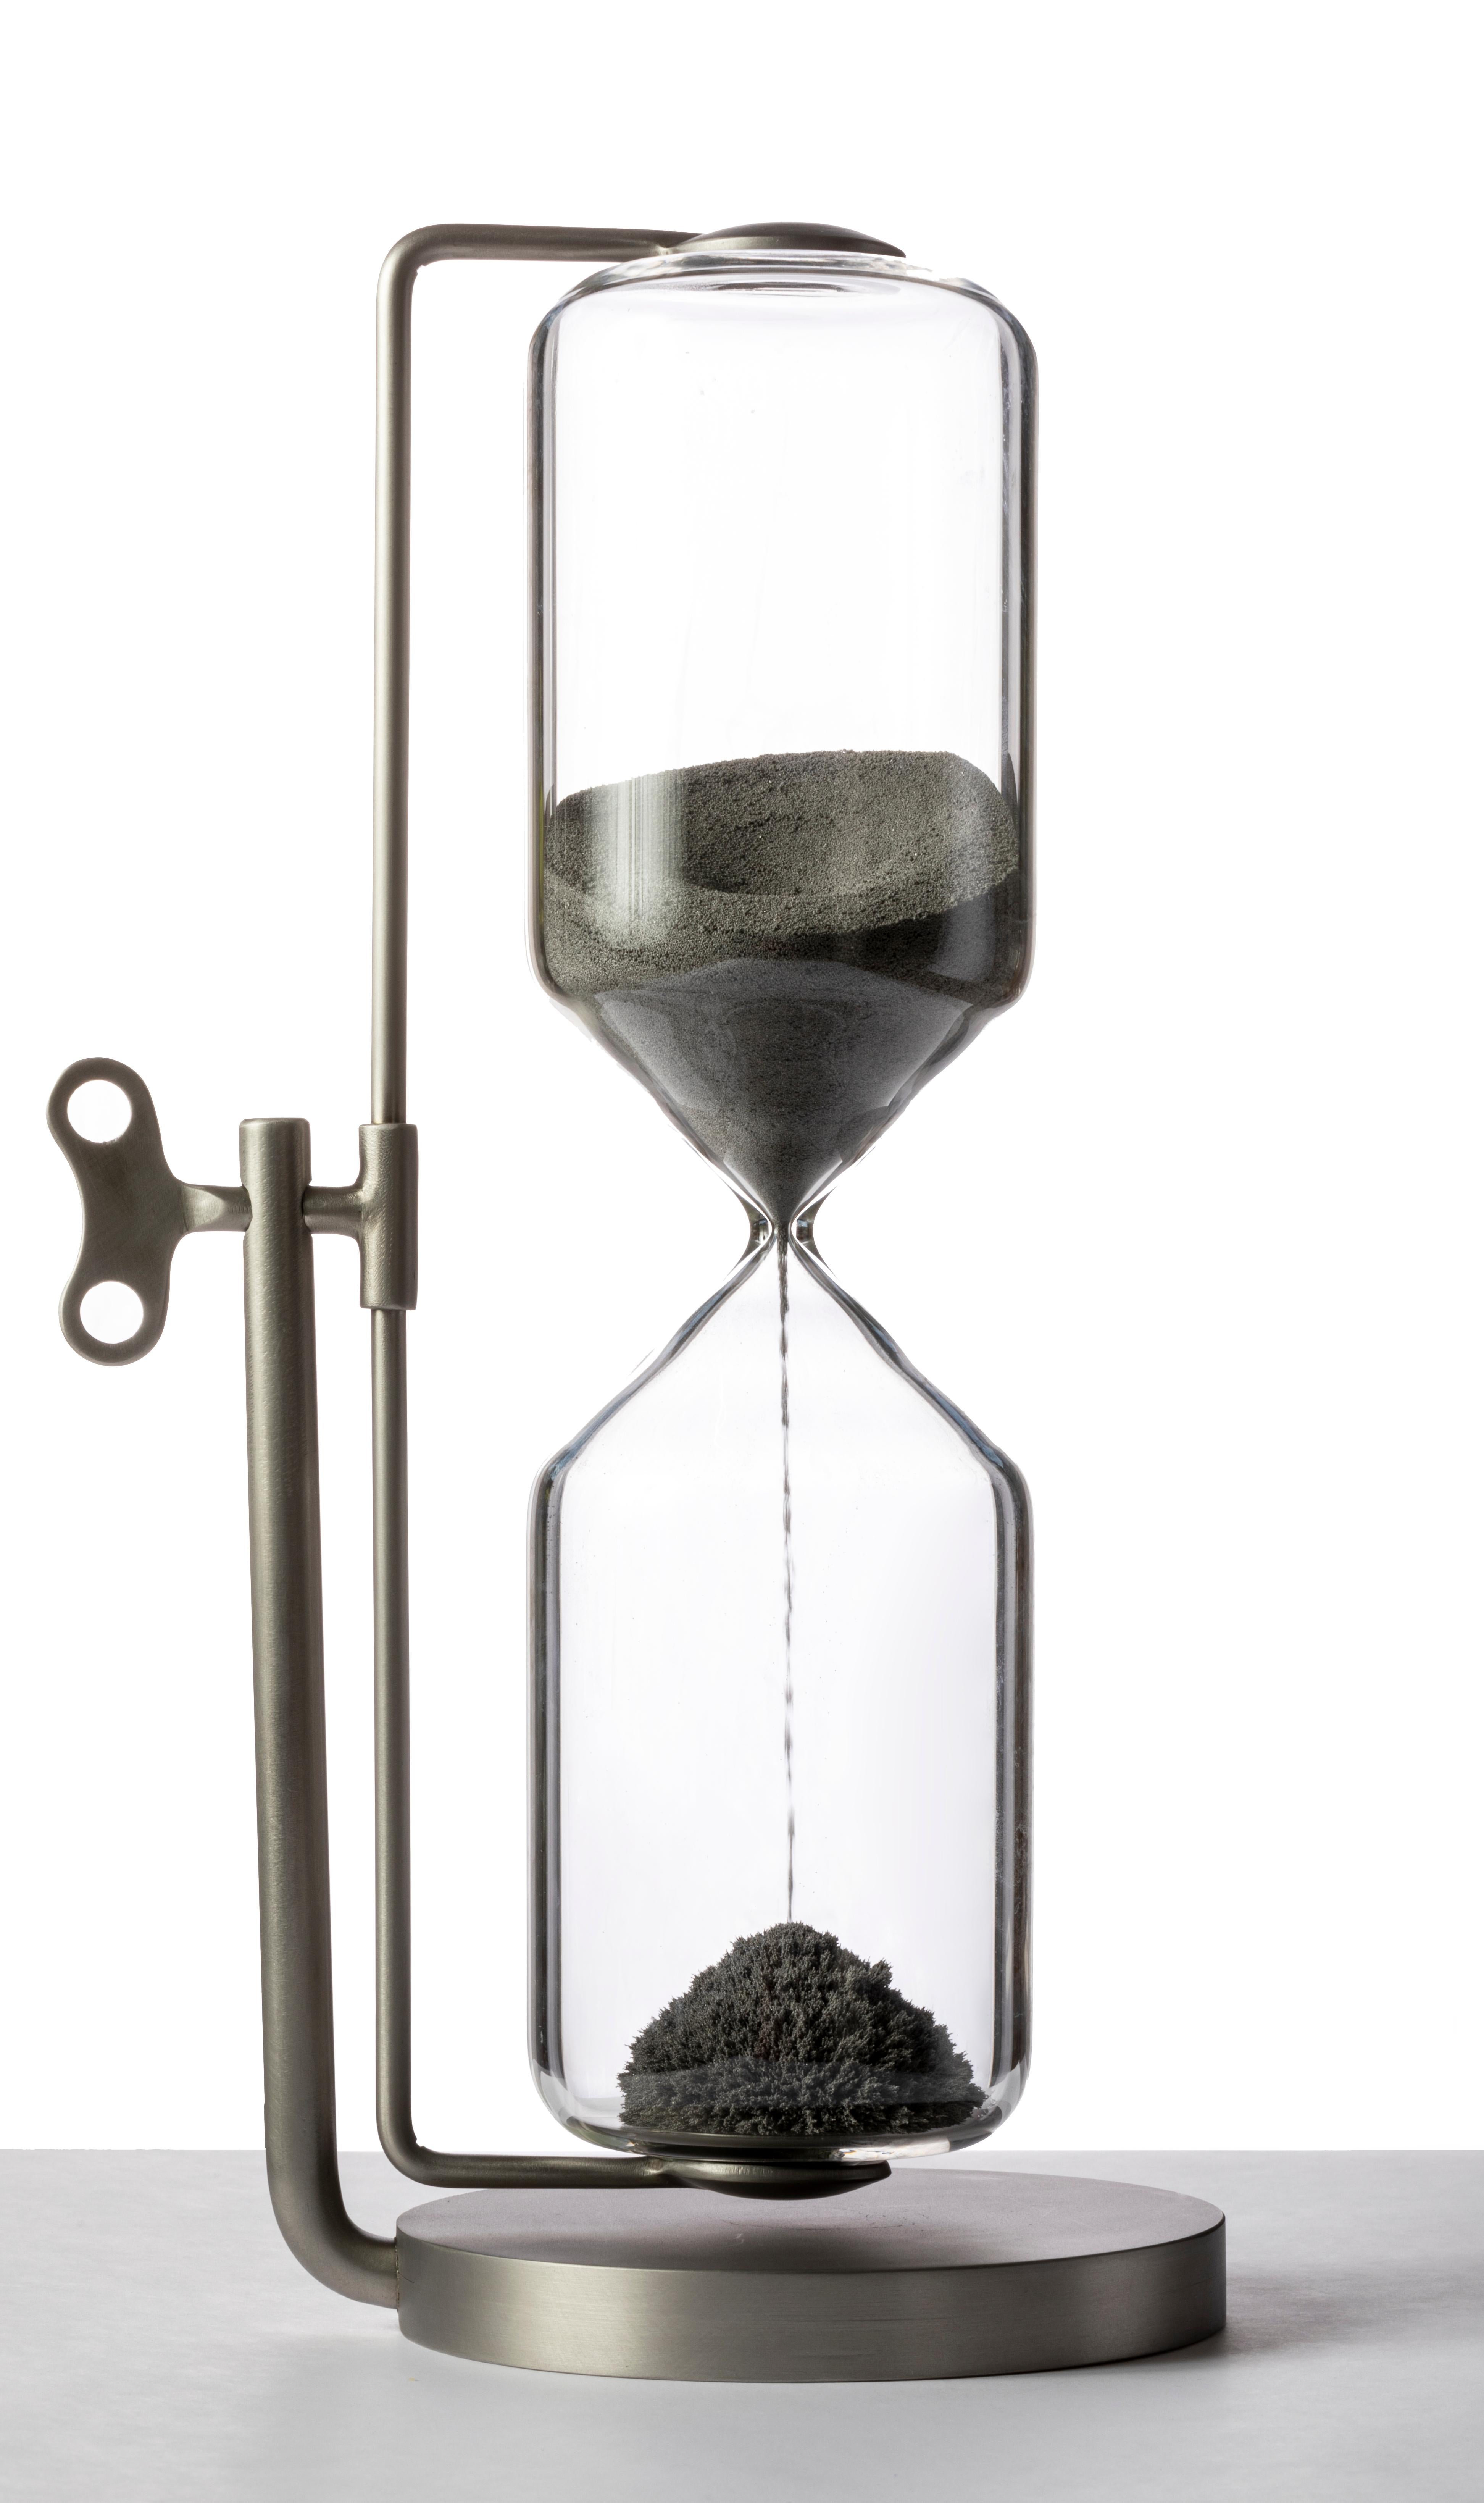 Sand clocks were among the first instruments that man devised to visually perceive and measure time. Ctrlzak’s Timeless project utilizes the properties of traditional materials in reviewing this nearly forgotten object. Inside the glass vial though